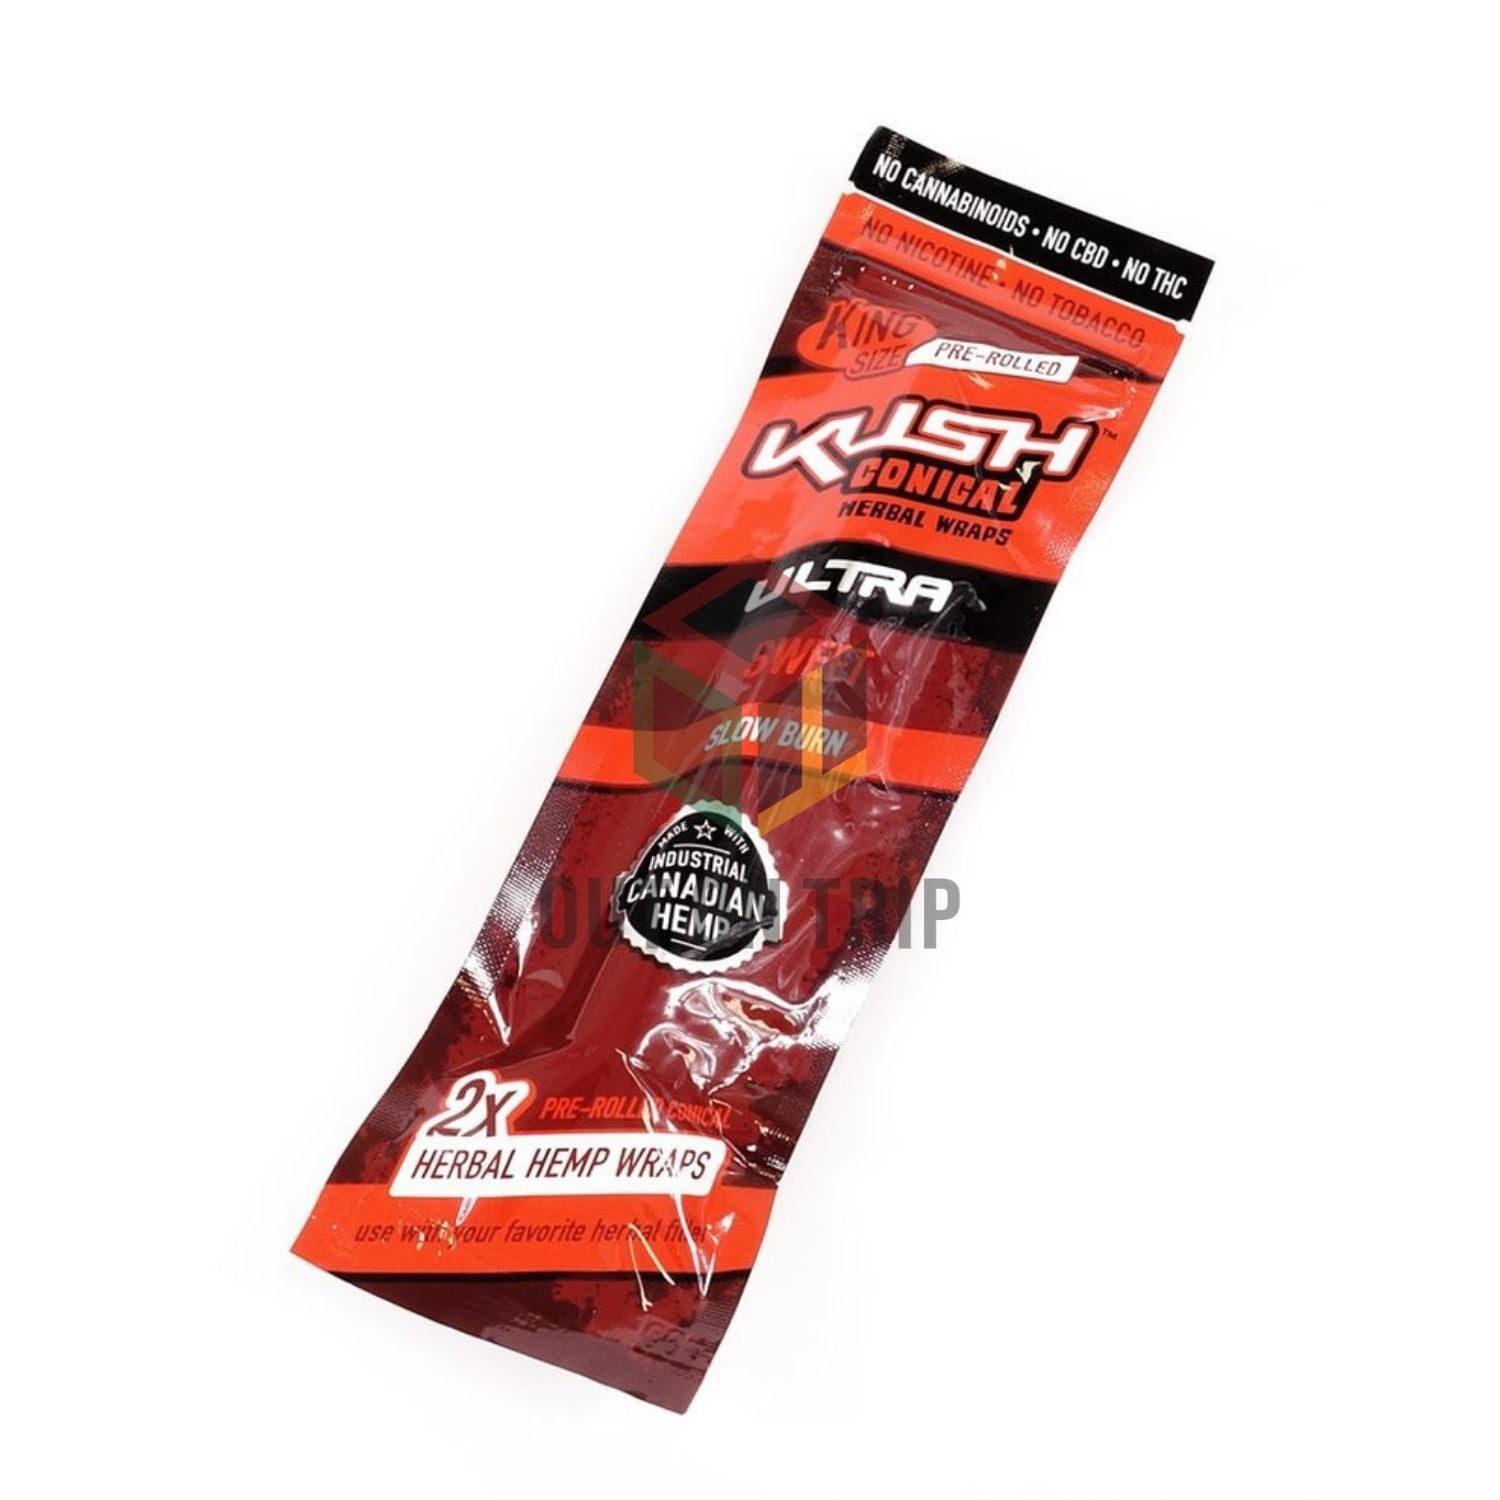 KUSH CONICAL HERBAL PREROLLED WRAPS ULTRA - Sweet